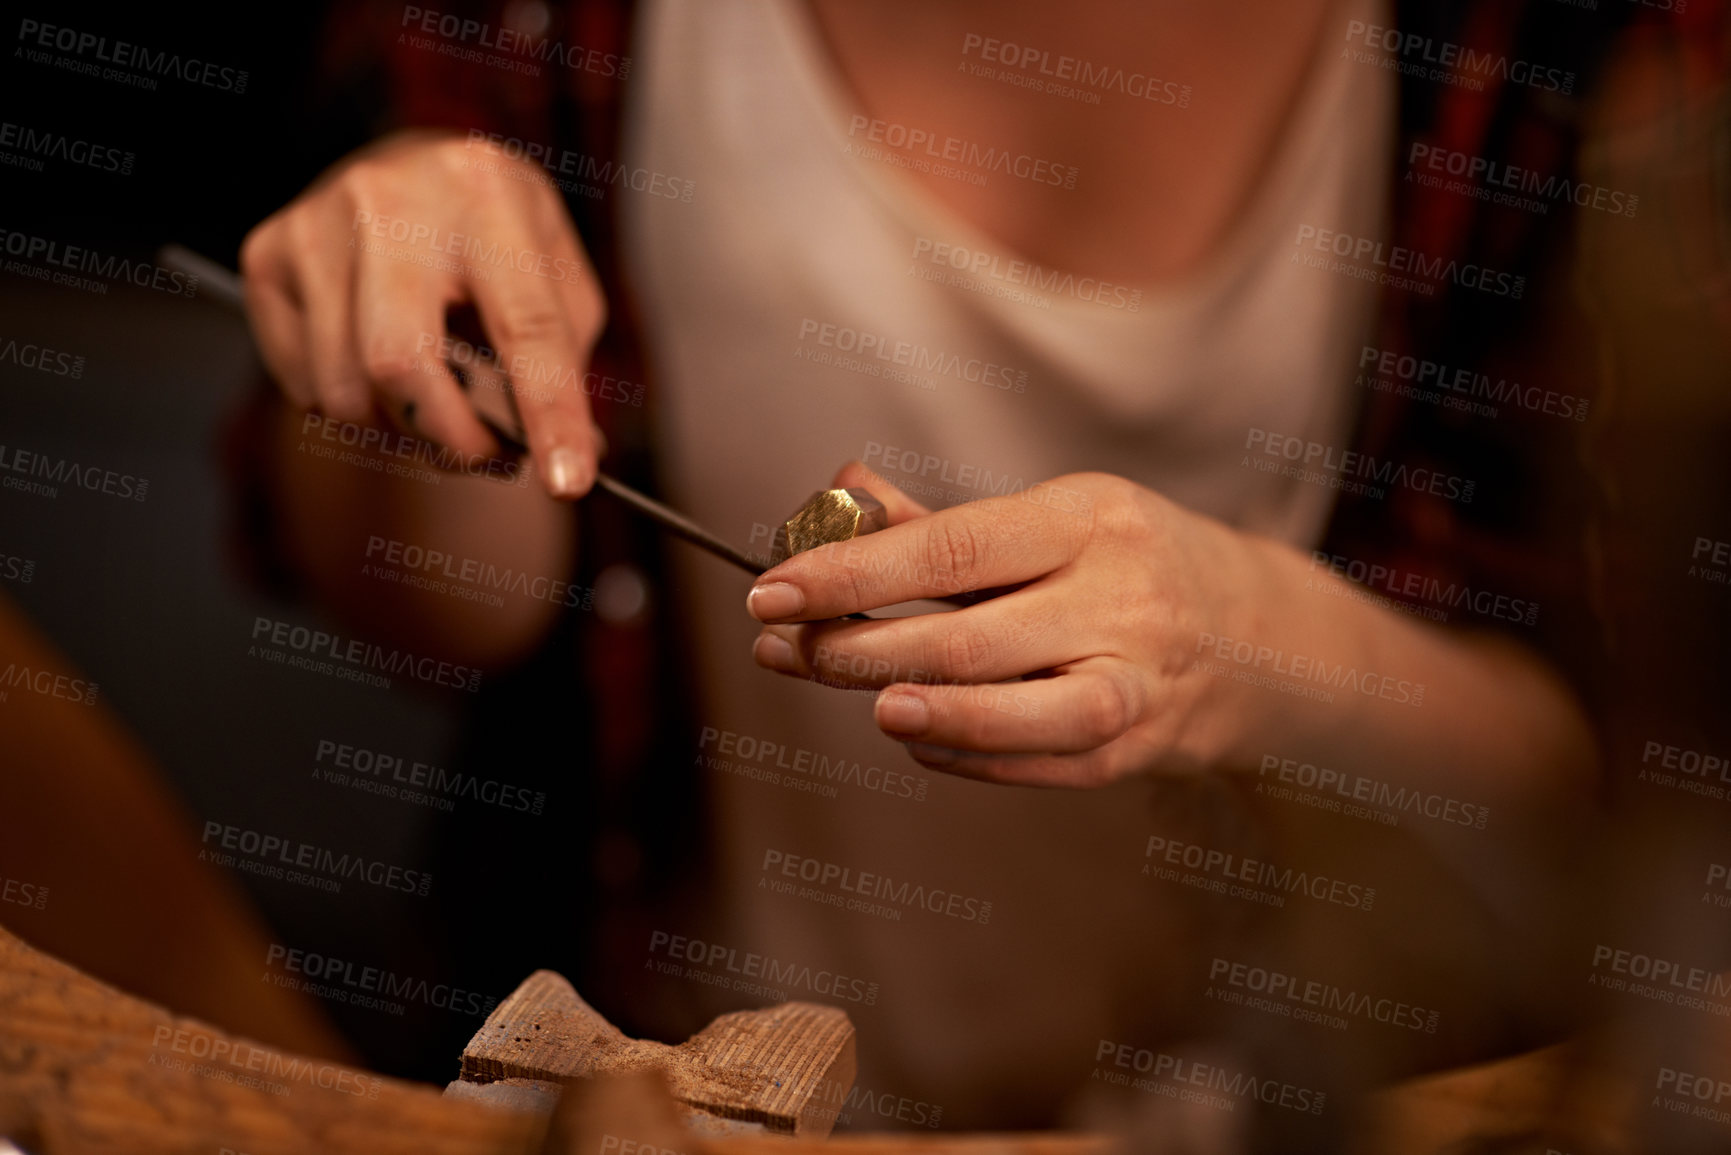 Buy stock photo An artist creating something out of wood